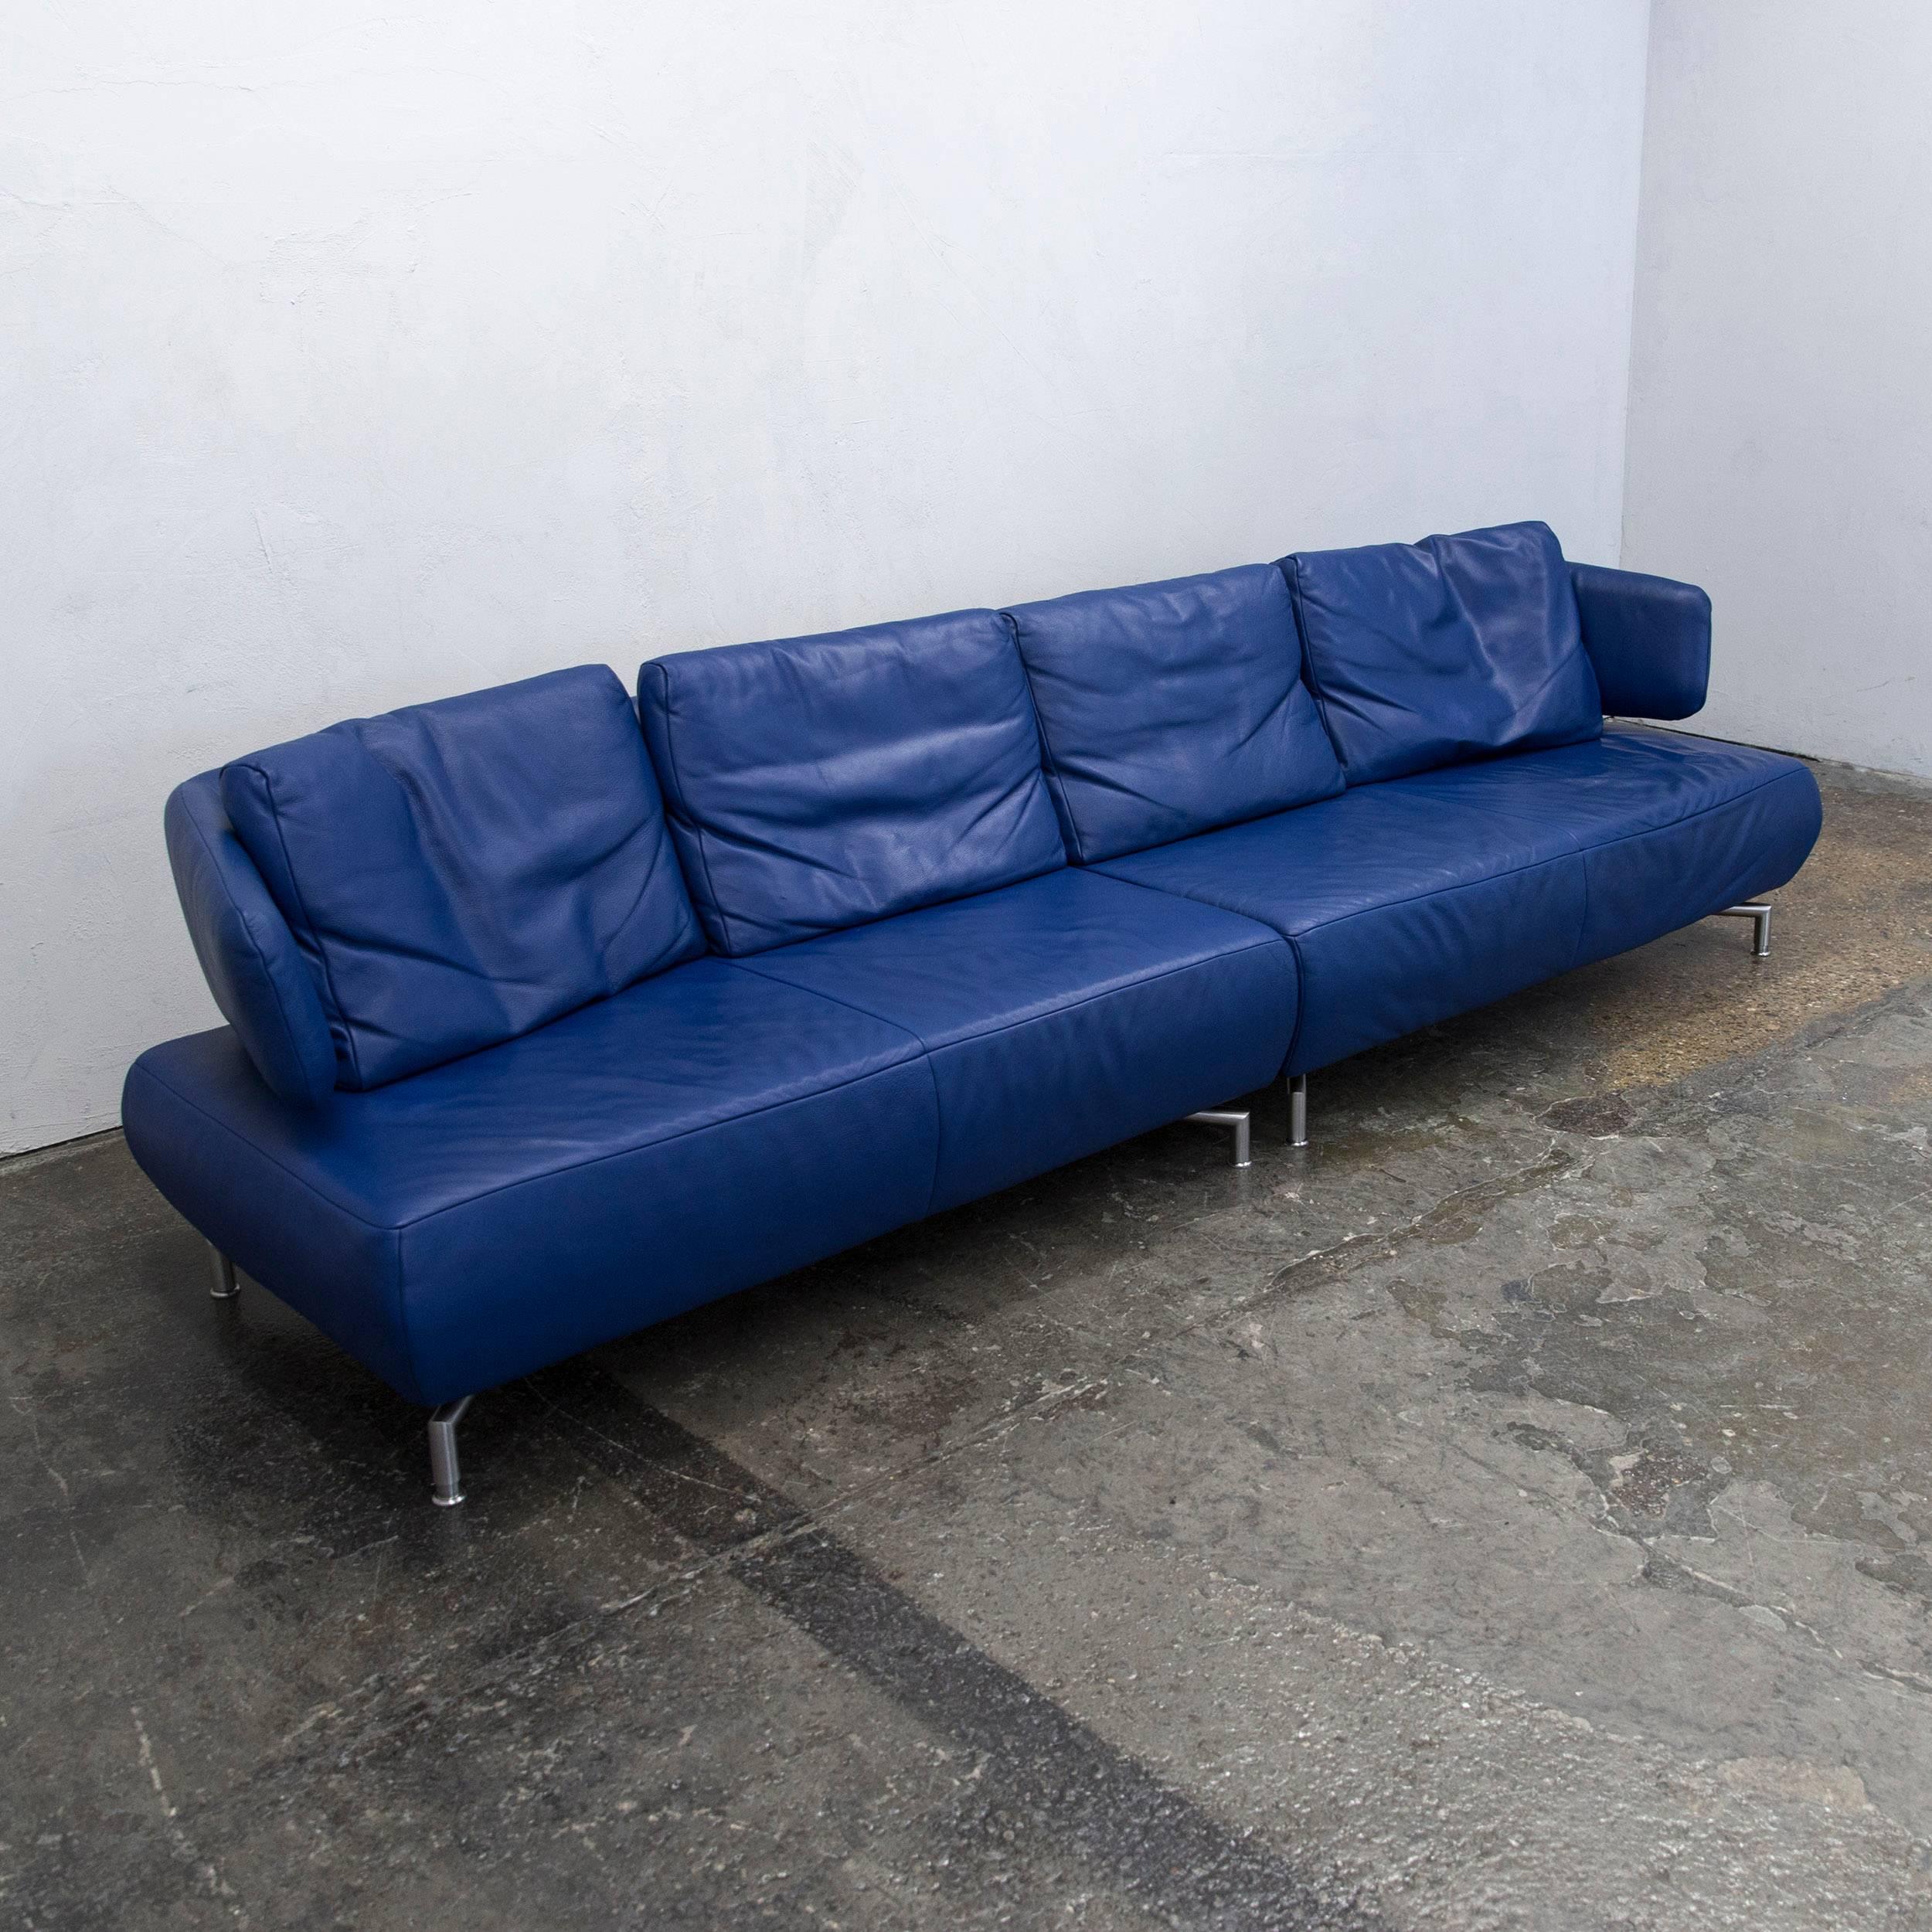 German Koinor Designer Sofa Leather Blue Four-Seat Couch Function Modern For Sale